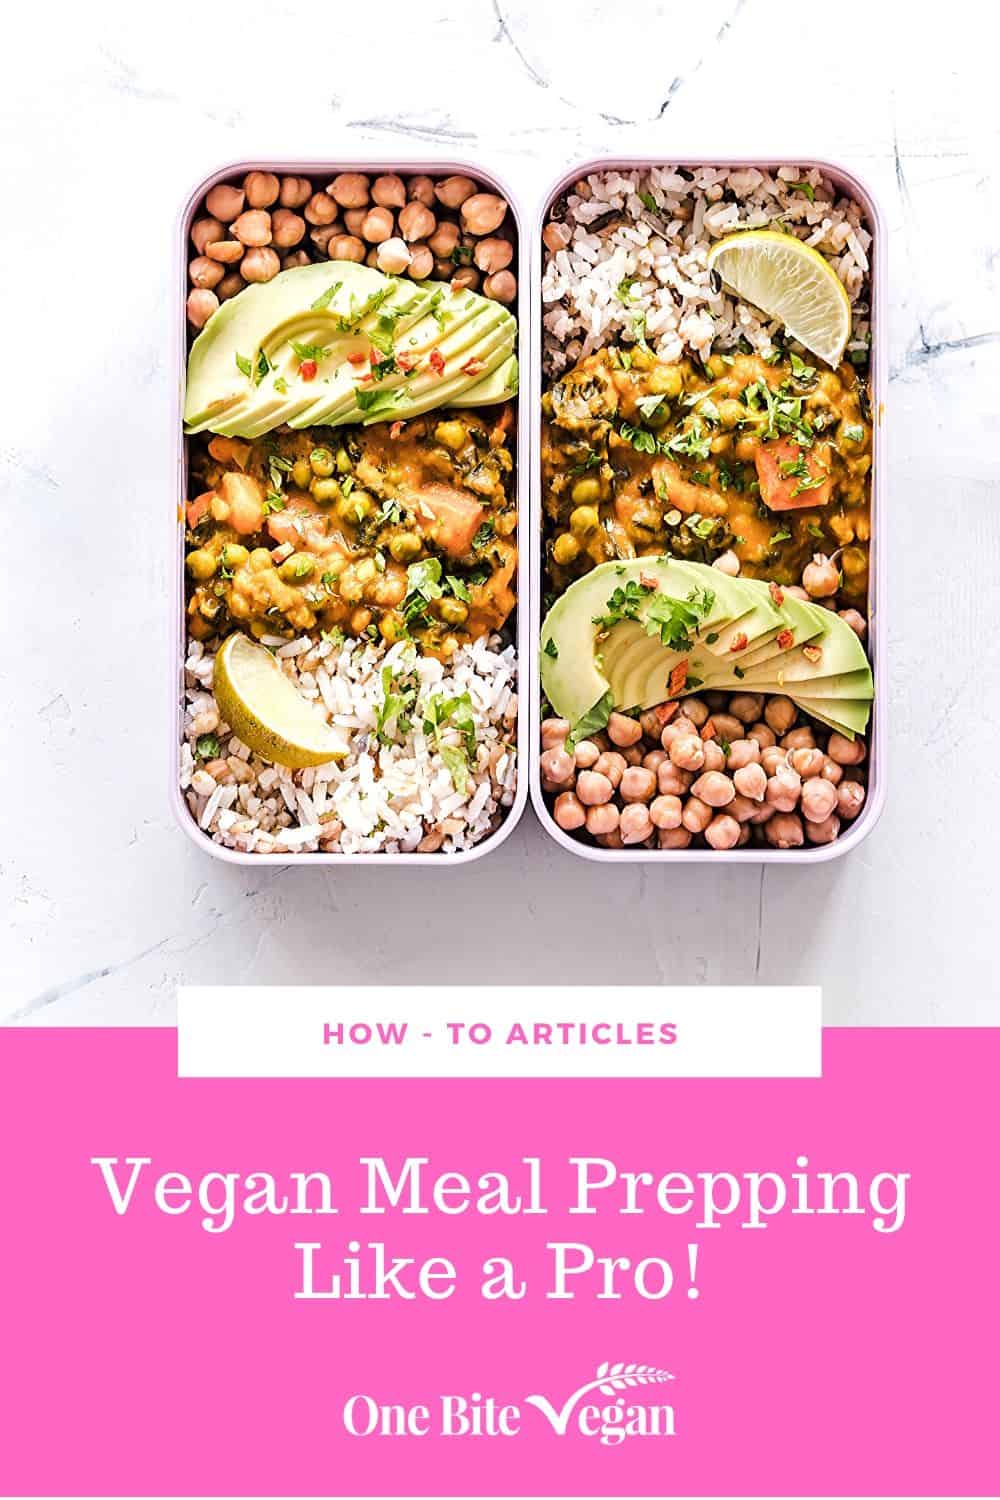 Vegan Meal Prepping Like a Pro